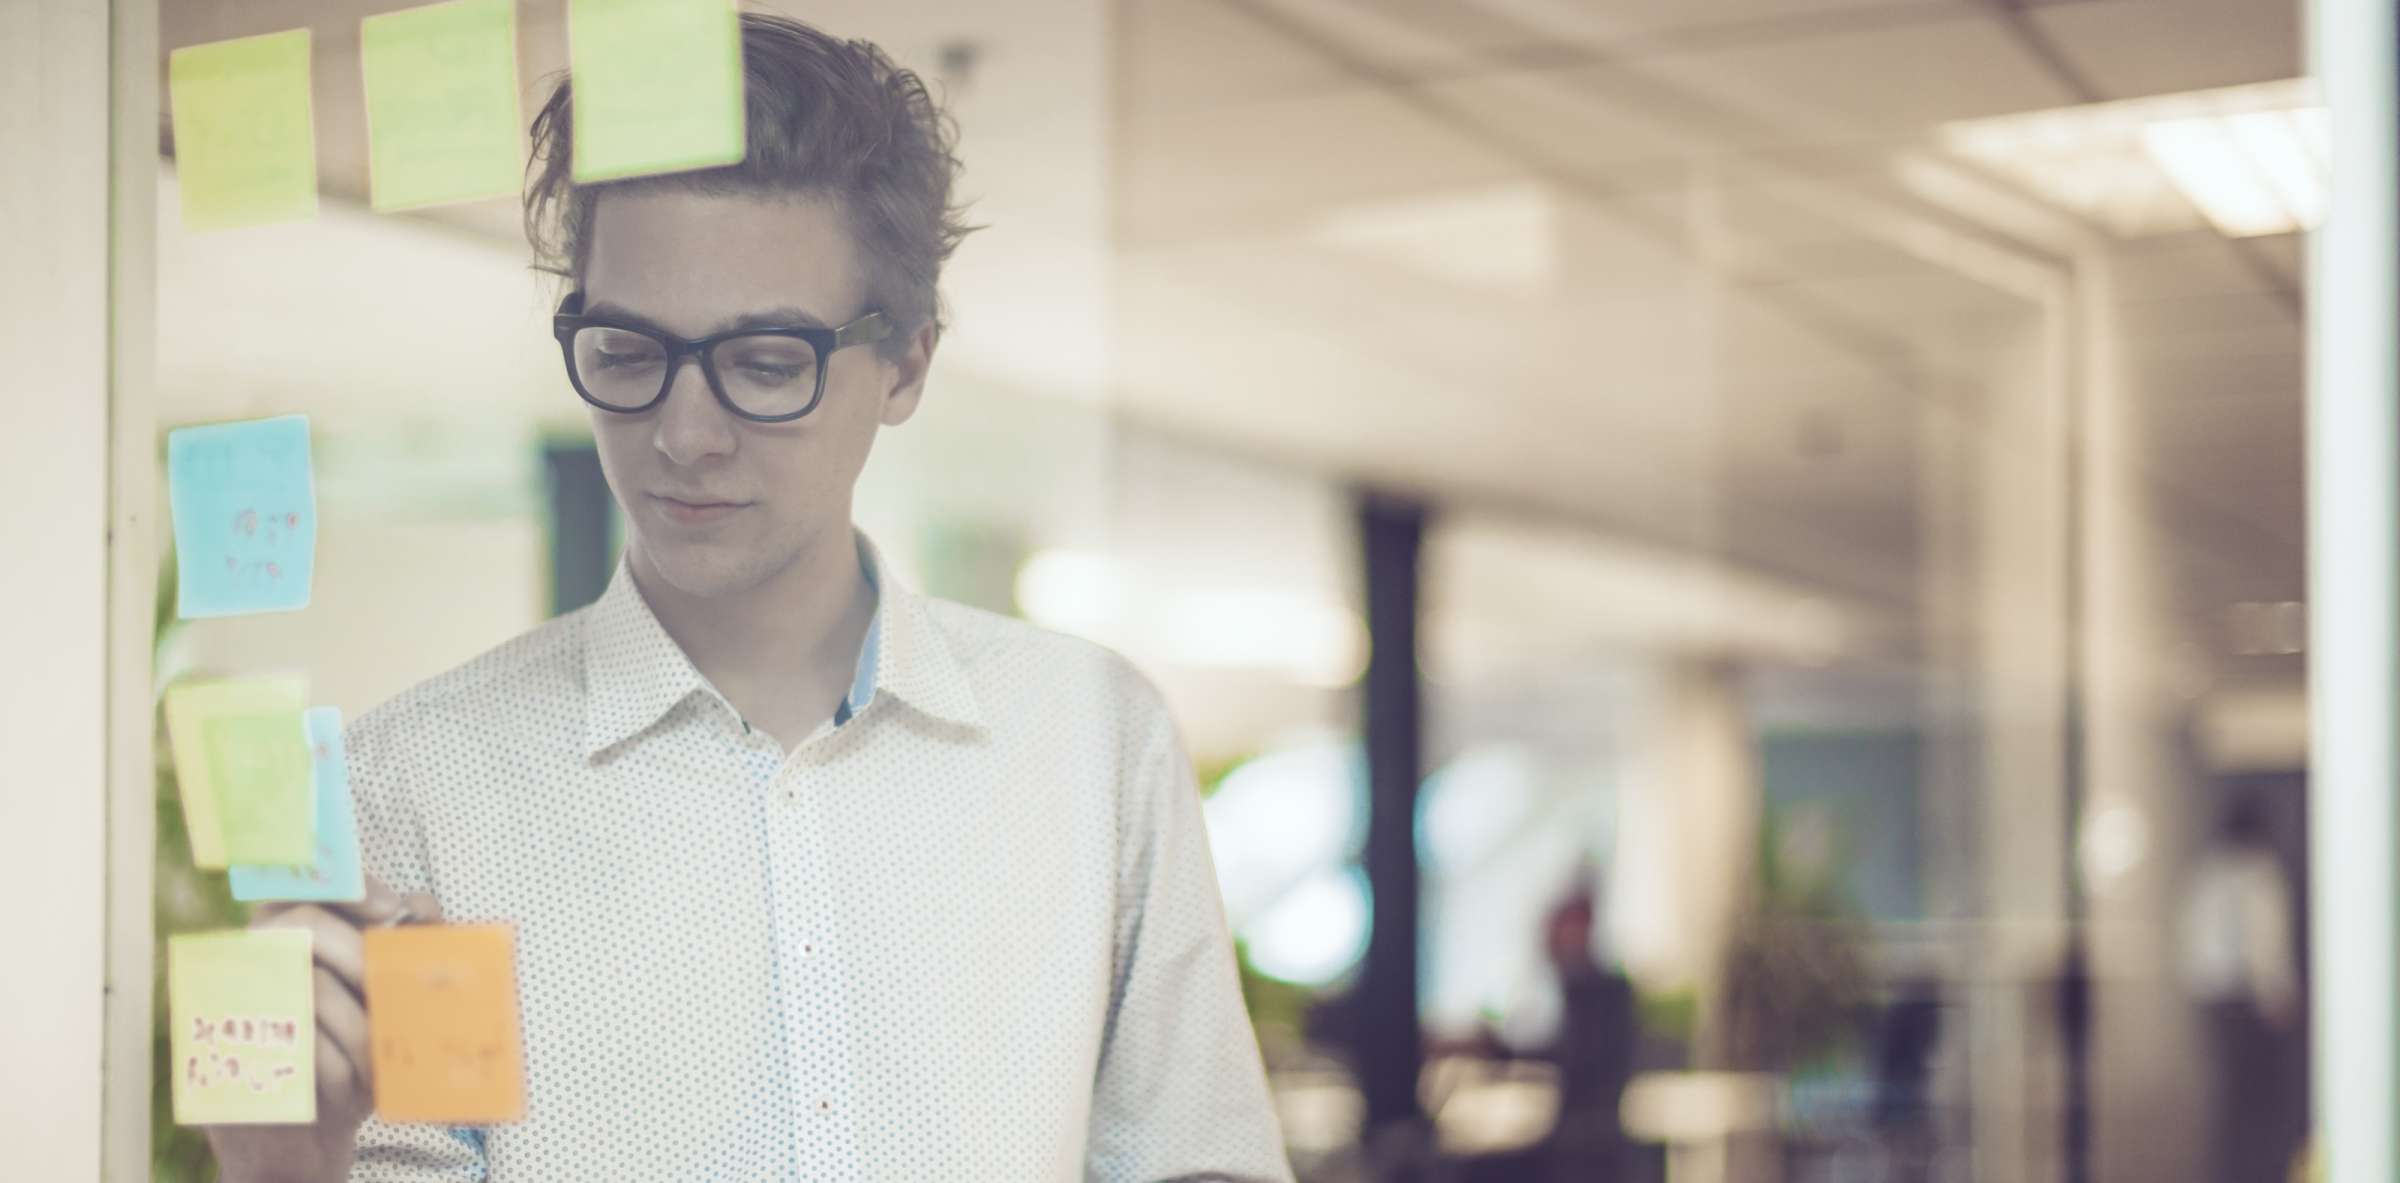 Background image: Worker with Post Its/ Brainstorm